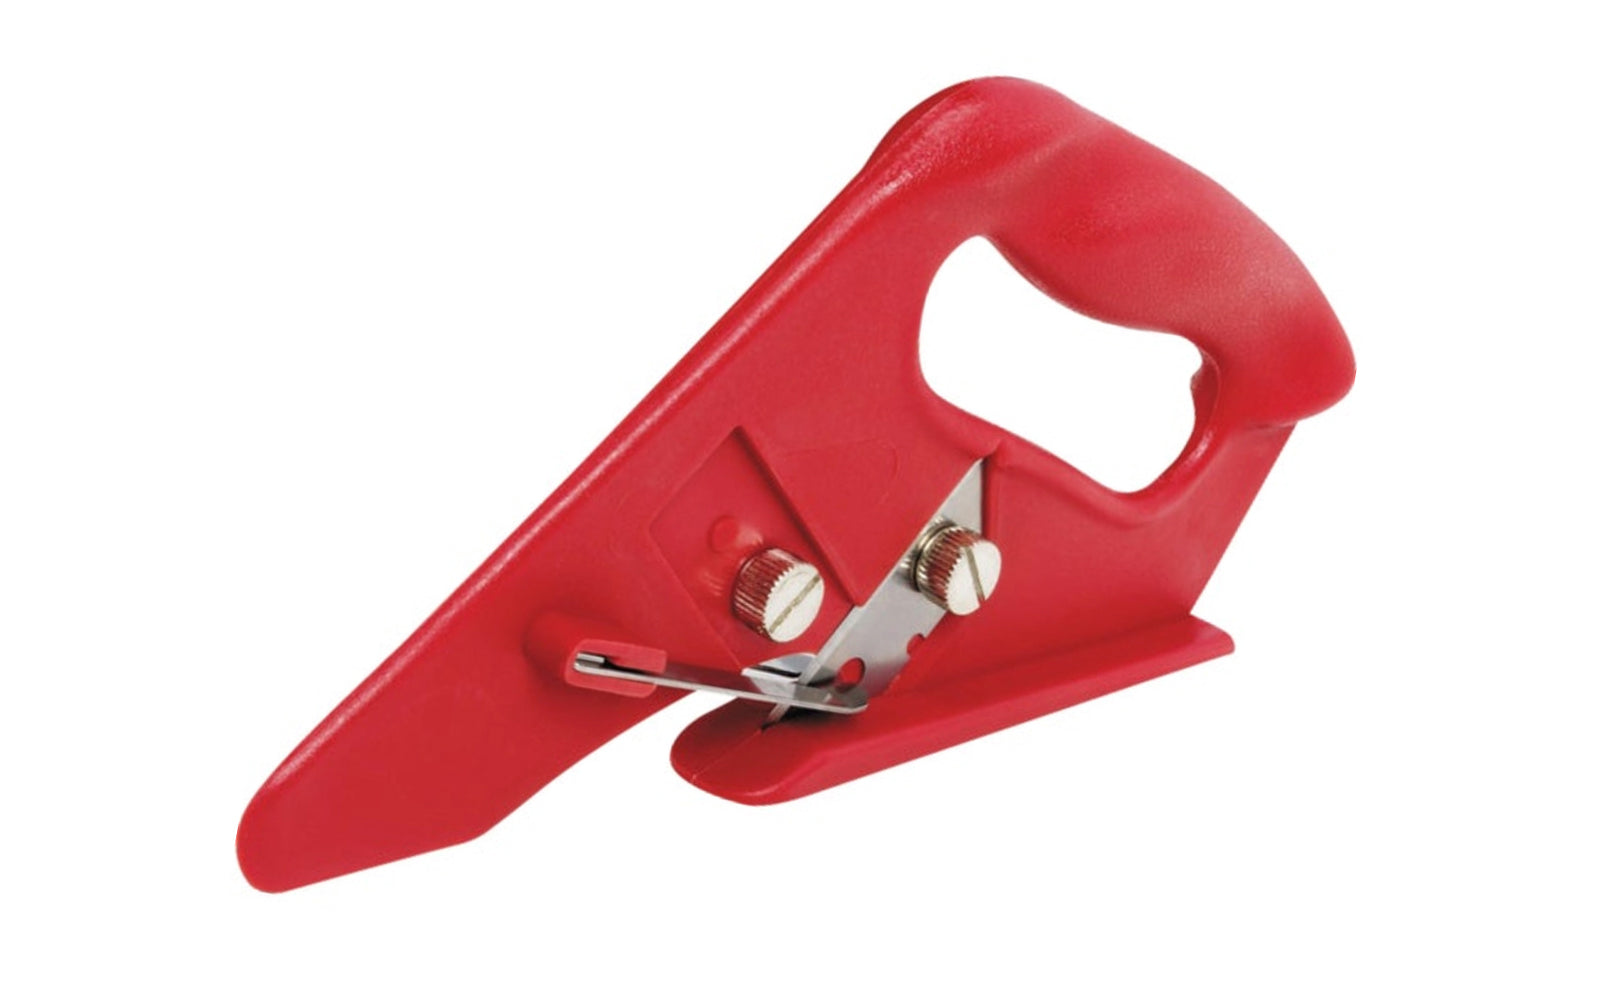 Universal Seam Cutter. Superior cutting action plus the 50-degree blade angle allows for clean, smooth, and precise cuts. Lightweight cutter allows for fast blade changes with the quick release blade replacement feature. Extra long nose provides for better row separation. Molded hand grip is comfortable and easy on